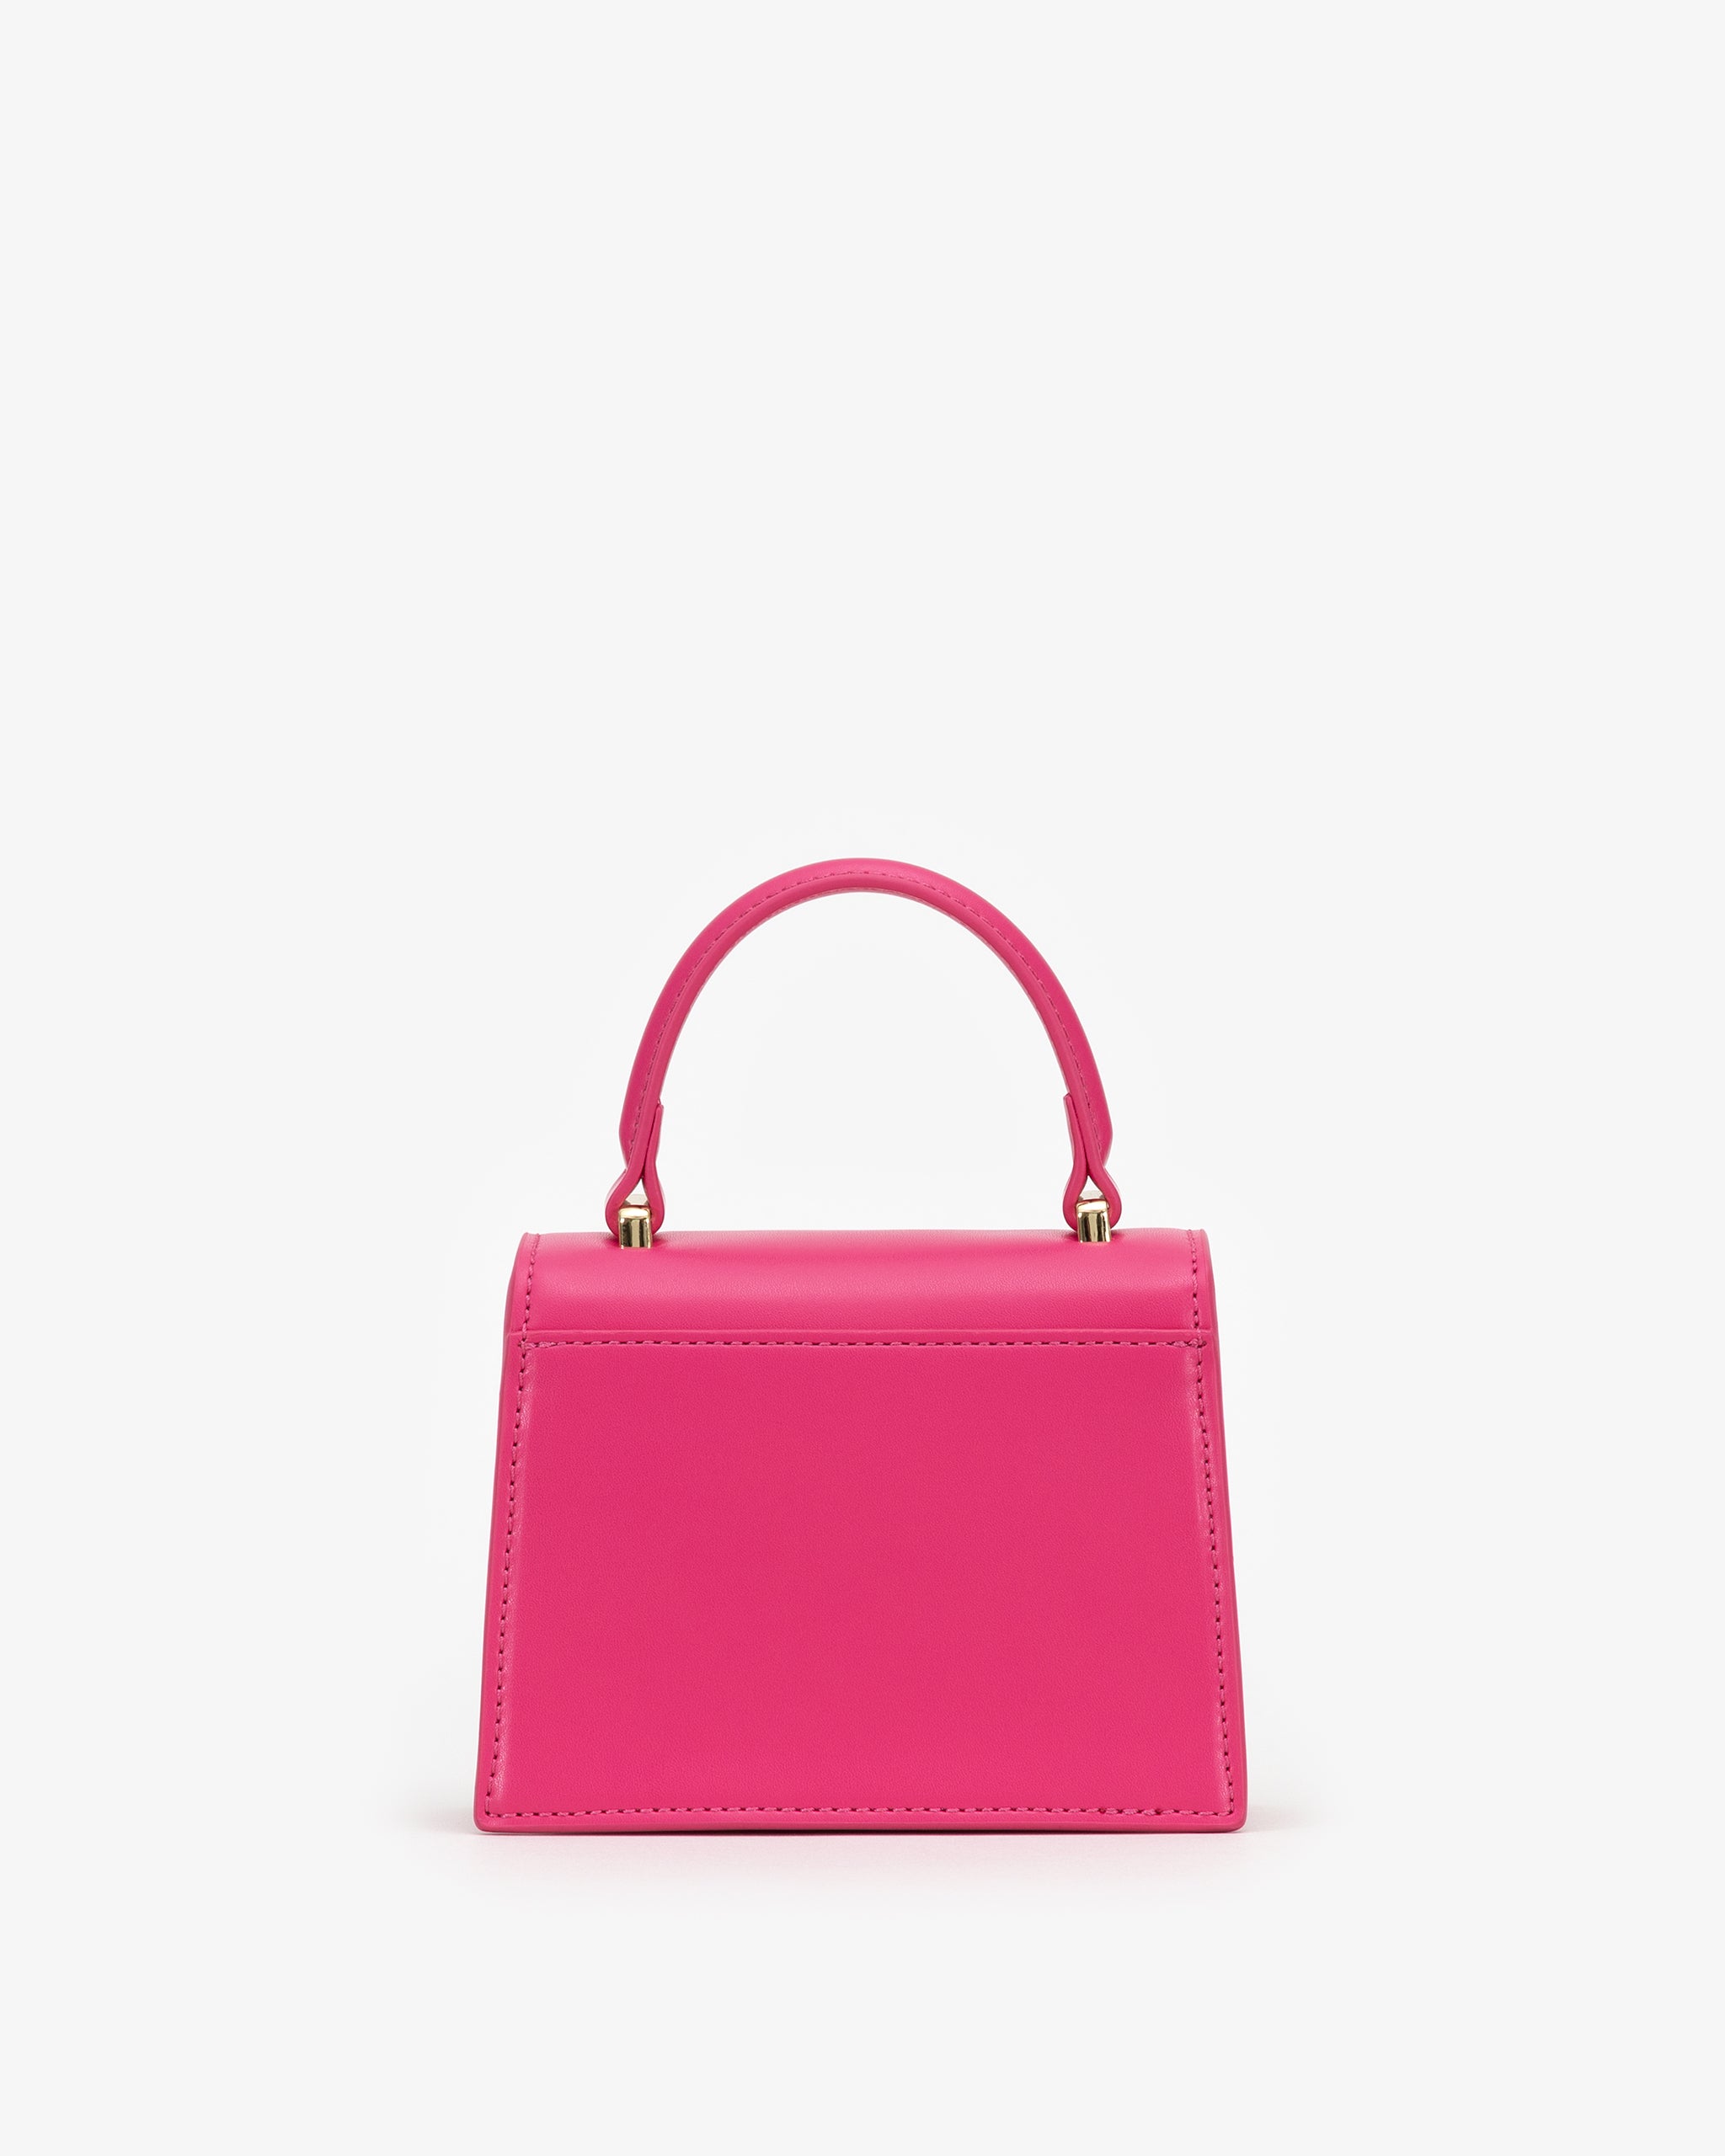 Mini Evening Bag in Hot Pink with Personalised Hardware